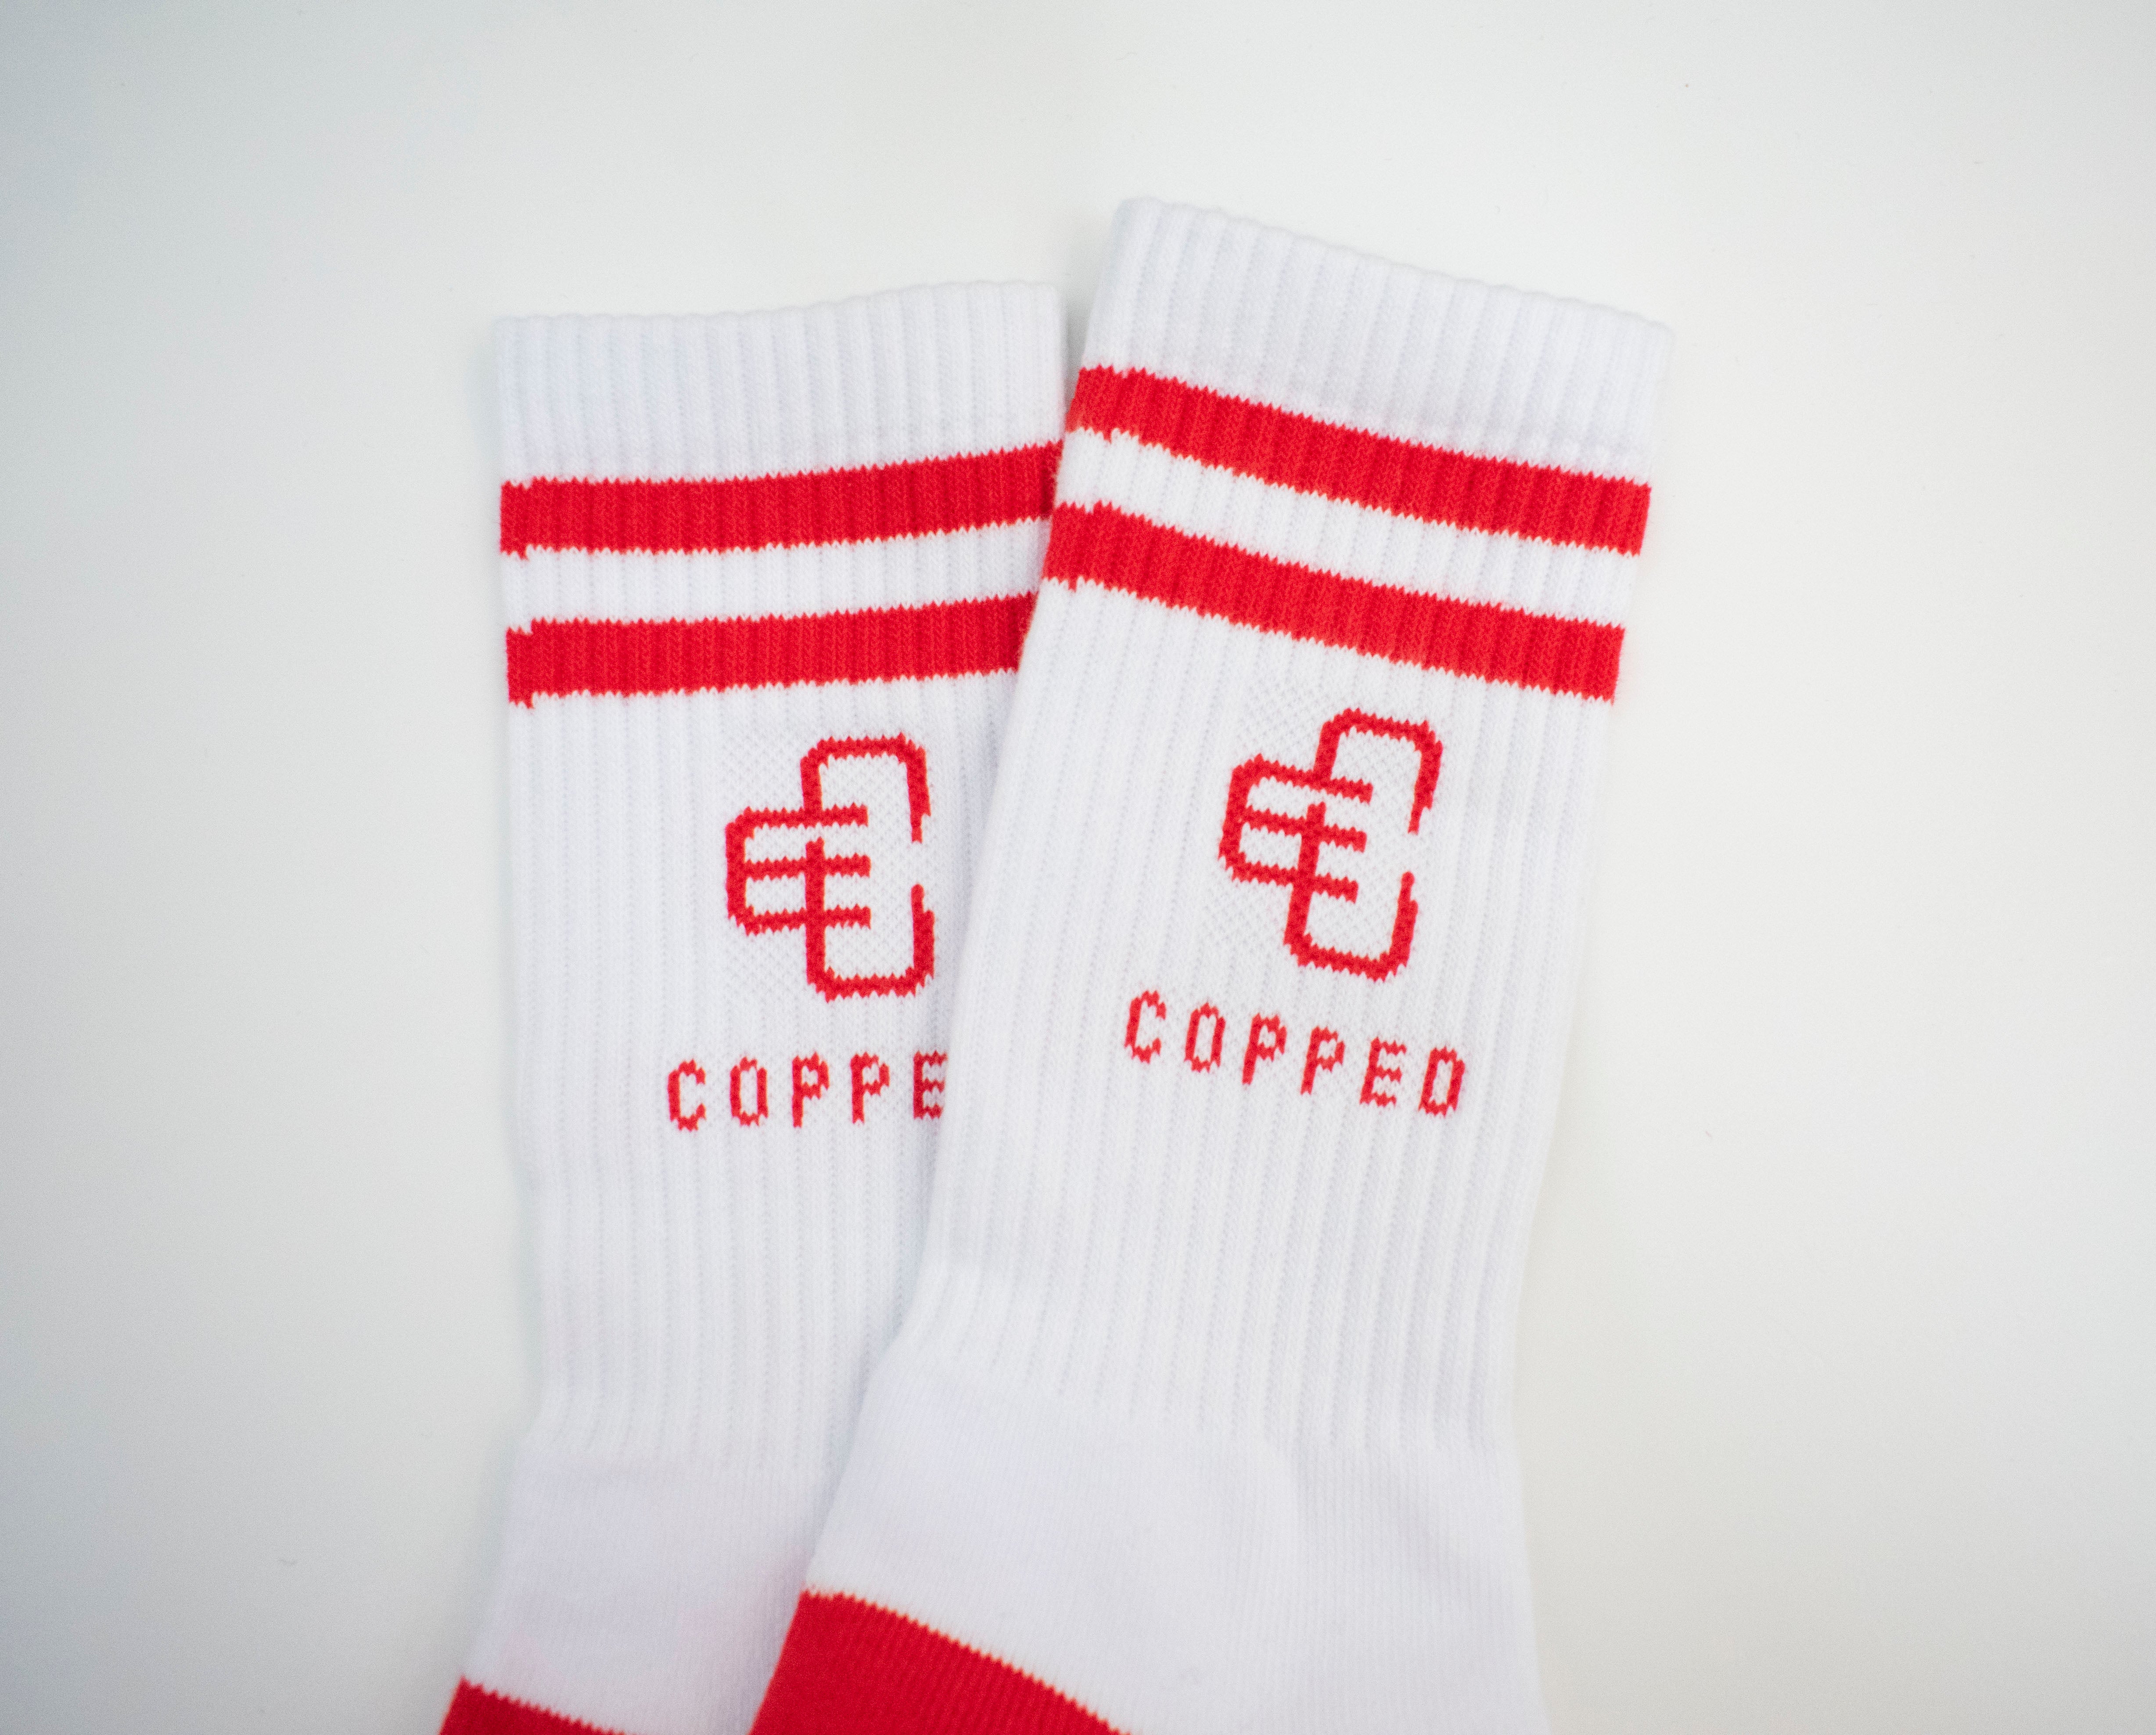 Copped White / Red Mid Socks 3-Pack